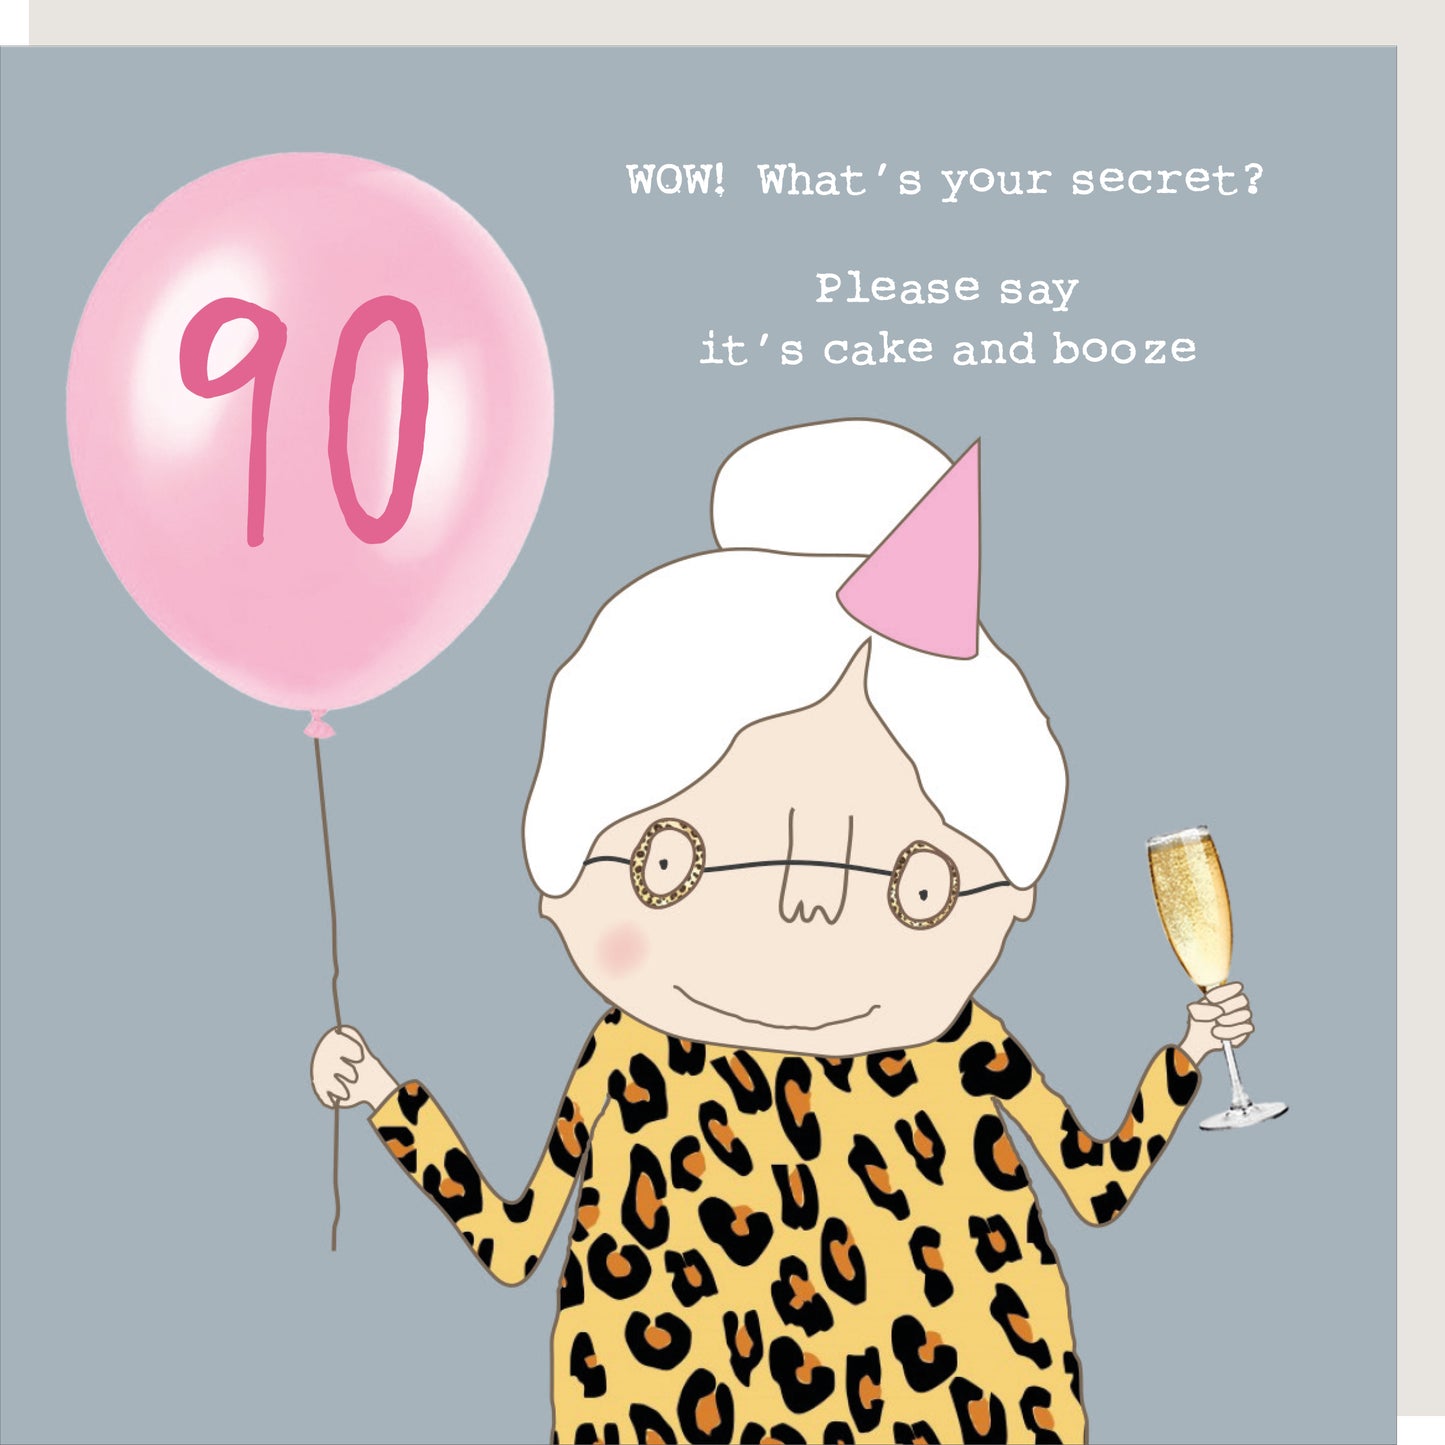 Rosie Made A Thing What's Your Secret Female 90th Birthday Card